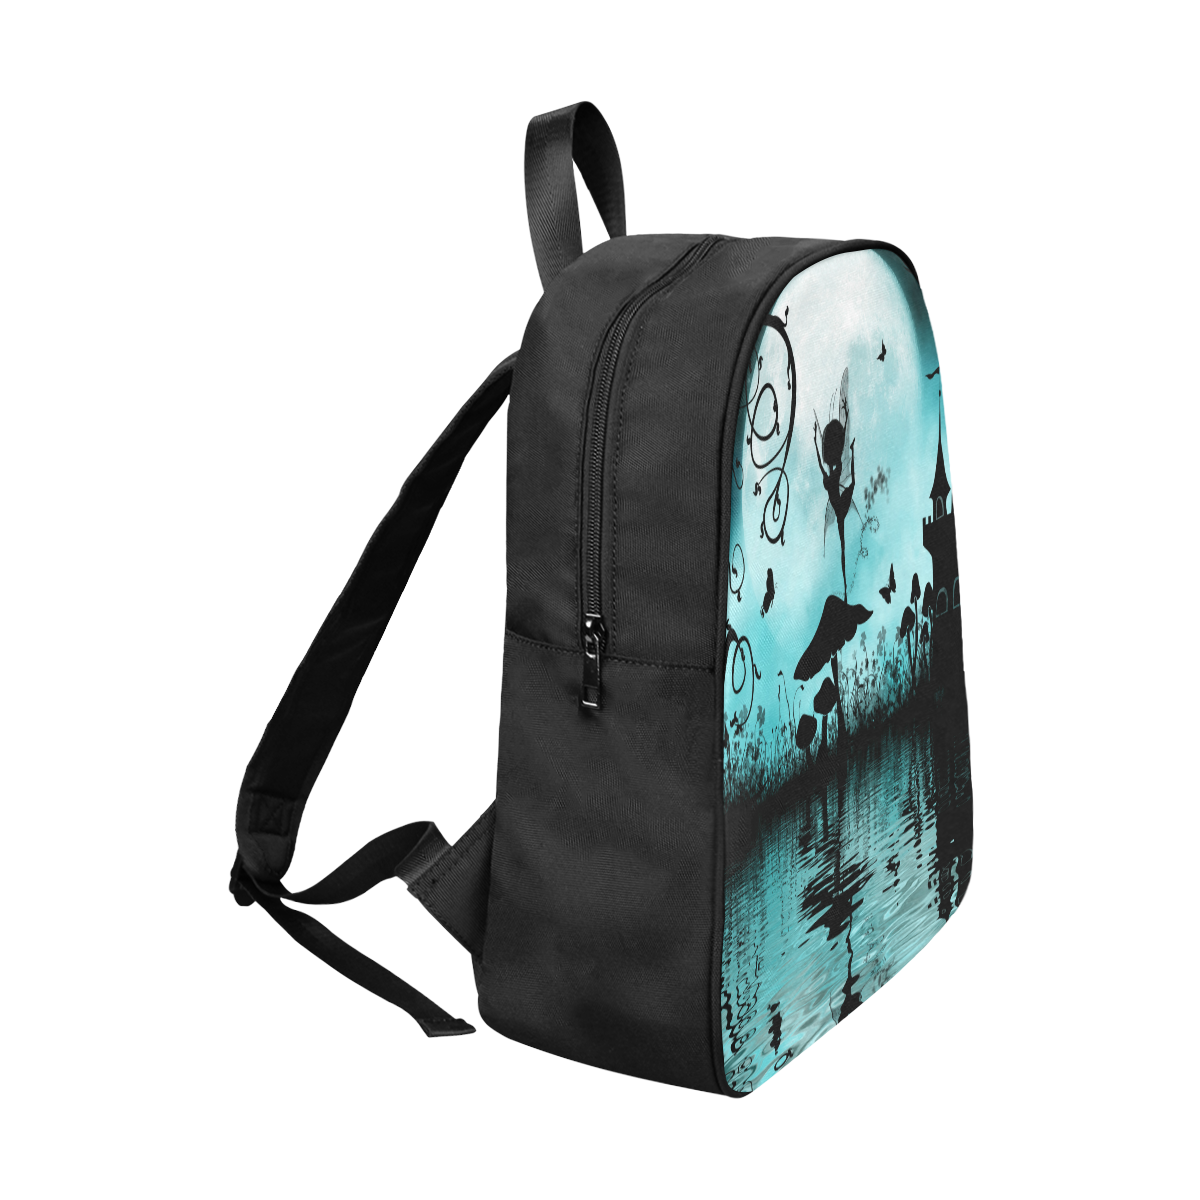 Dancing in the night Fabric School Backpack (Model 1682) (Large)